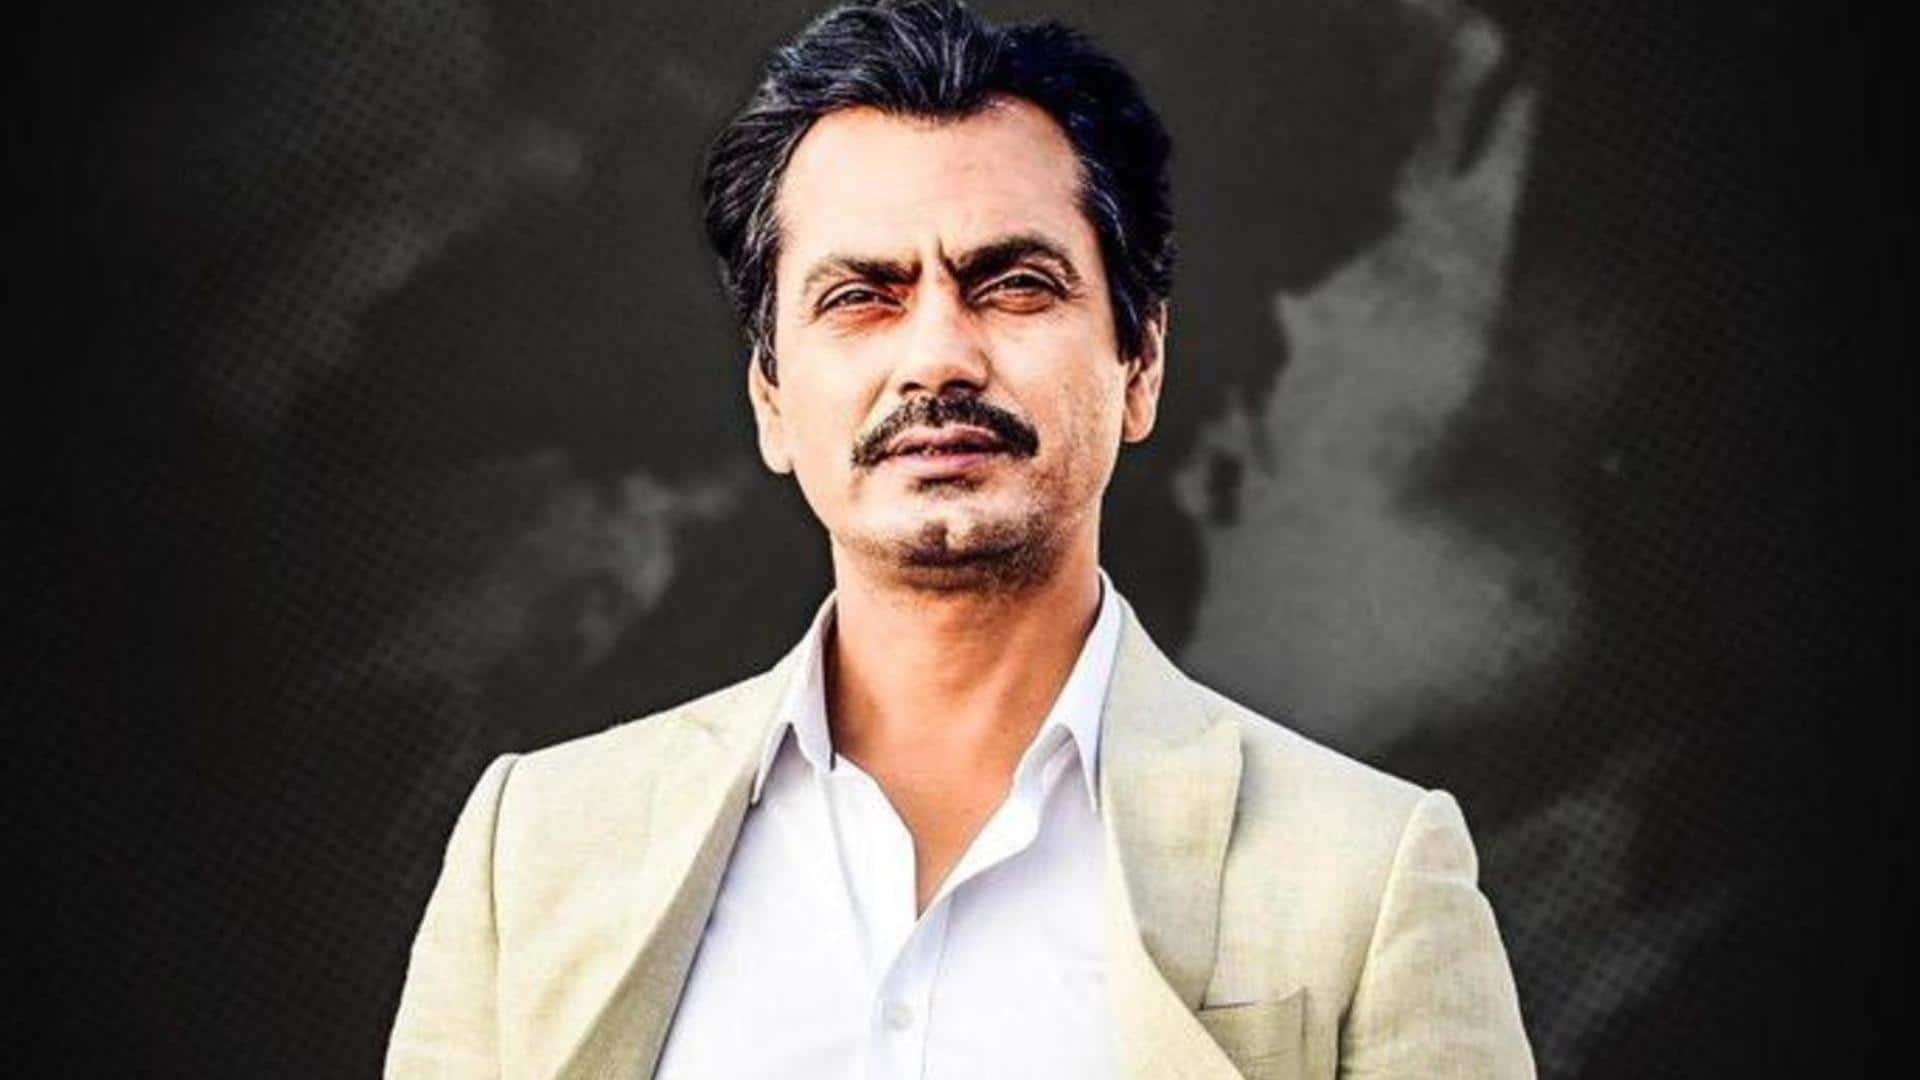 Nawazuddin Siddiqui barred from meeting ailing mother: Report